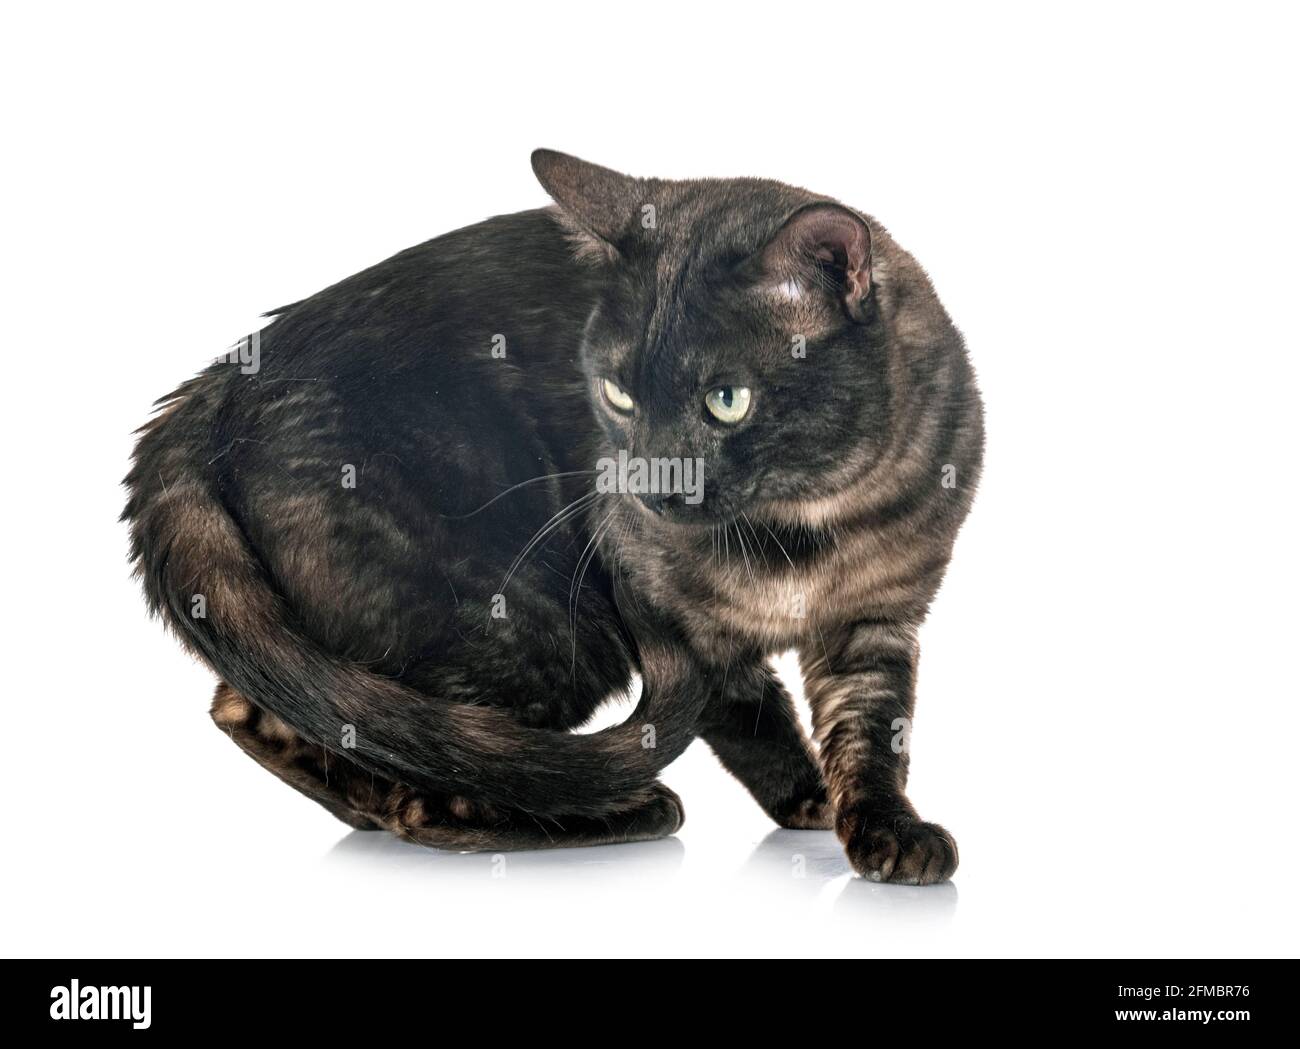 Bengal Cat in front of white background Banque D'Images